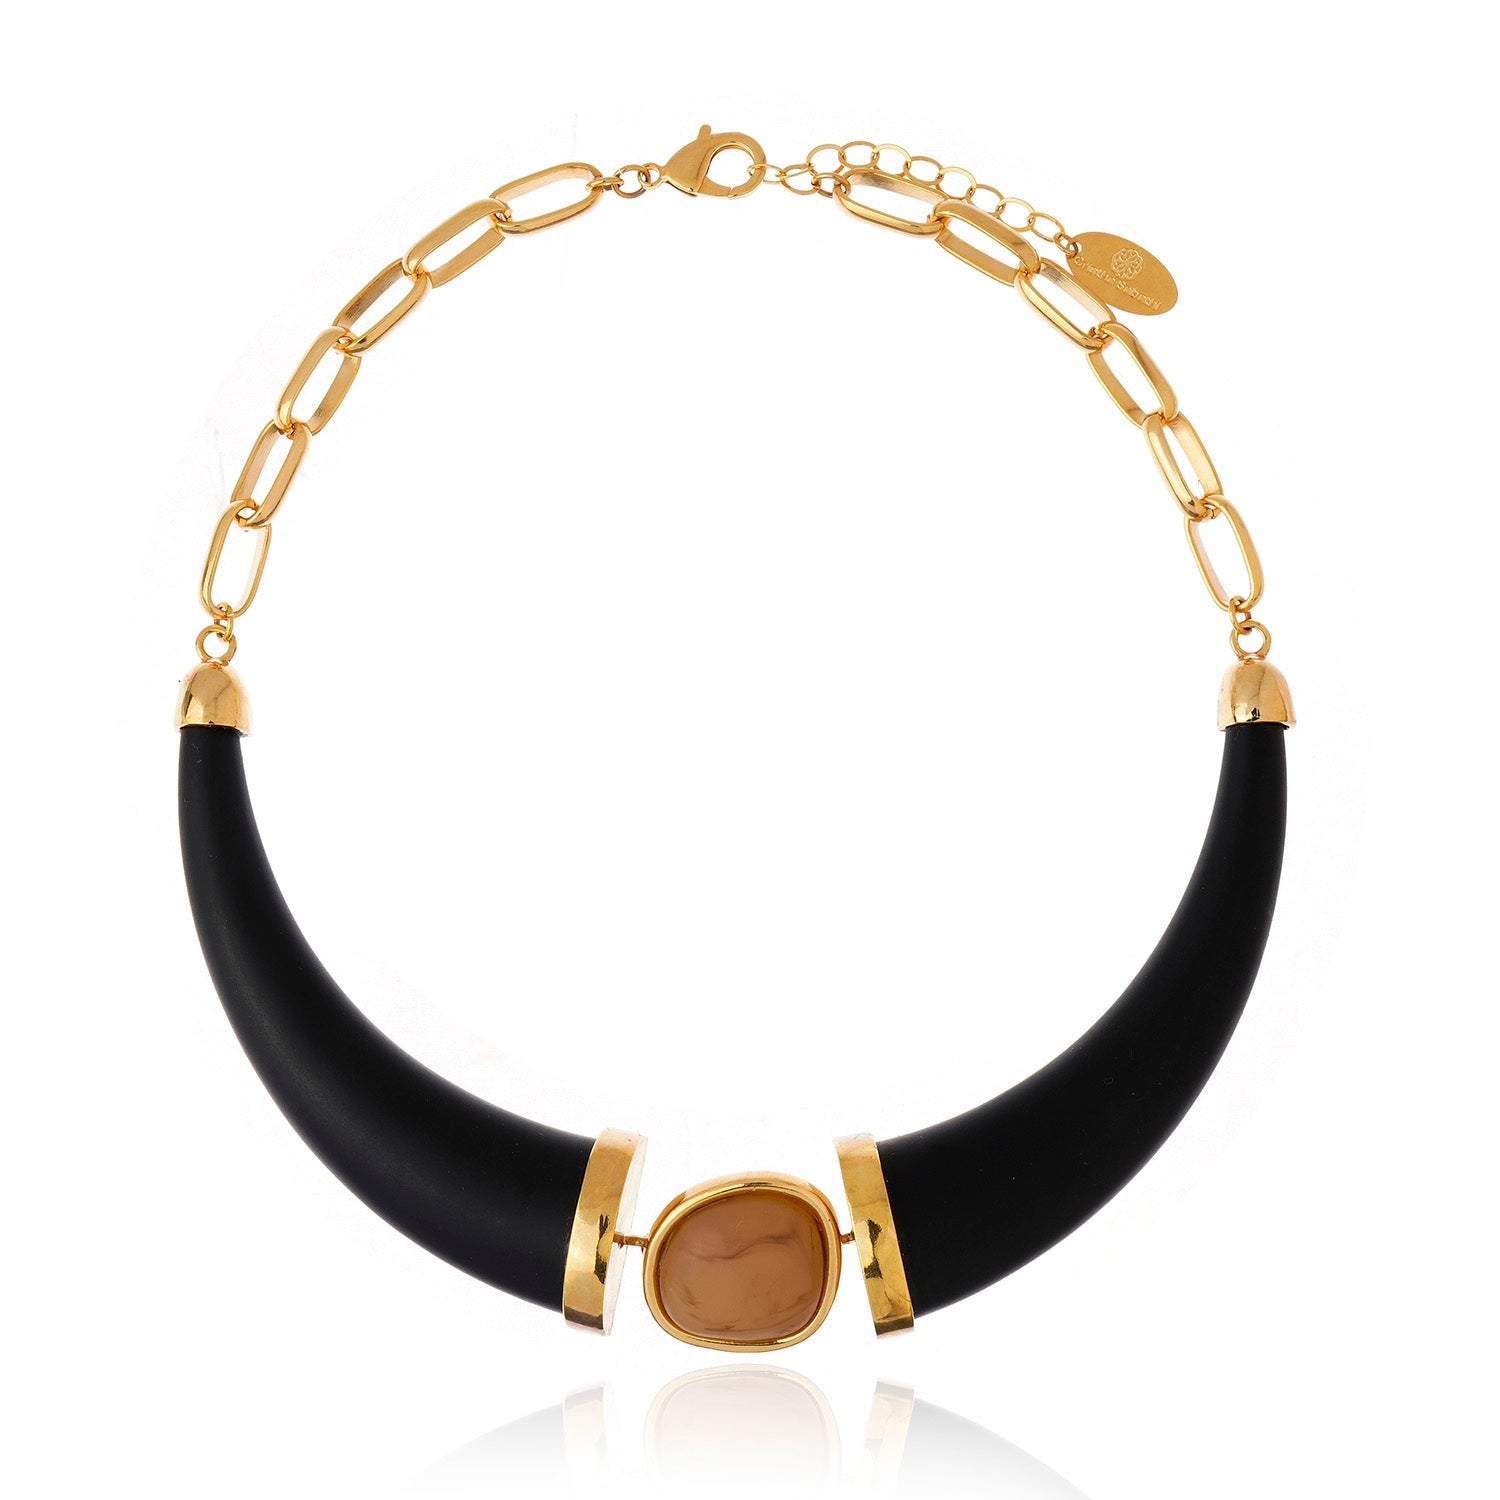 Horn Resin Necklace - Black and Beige